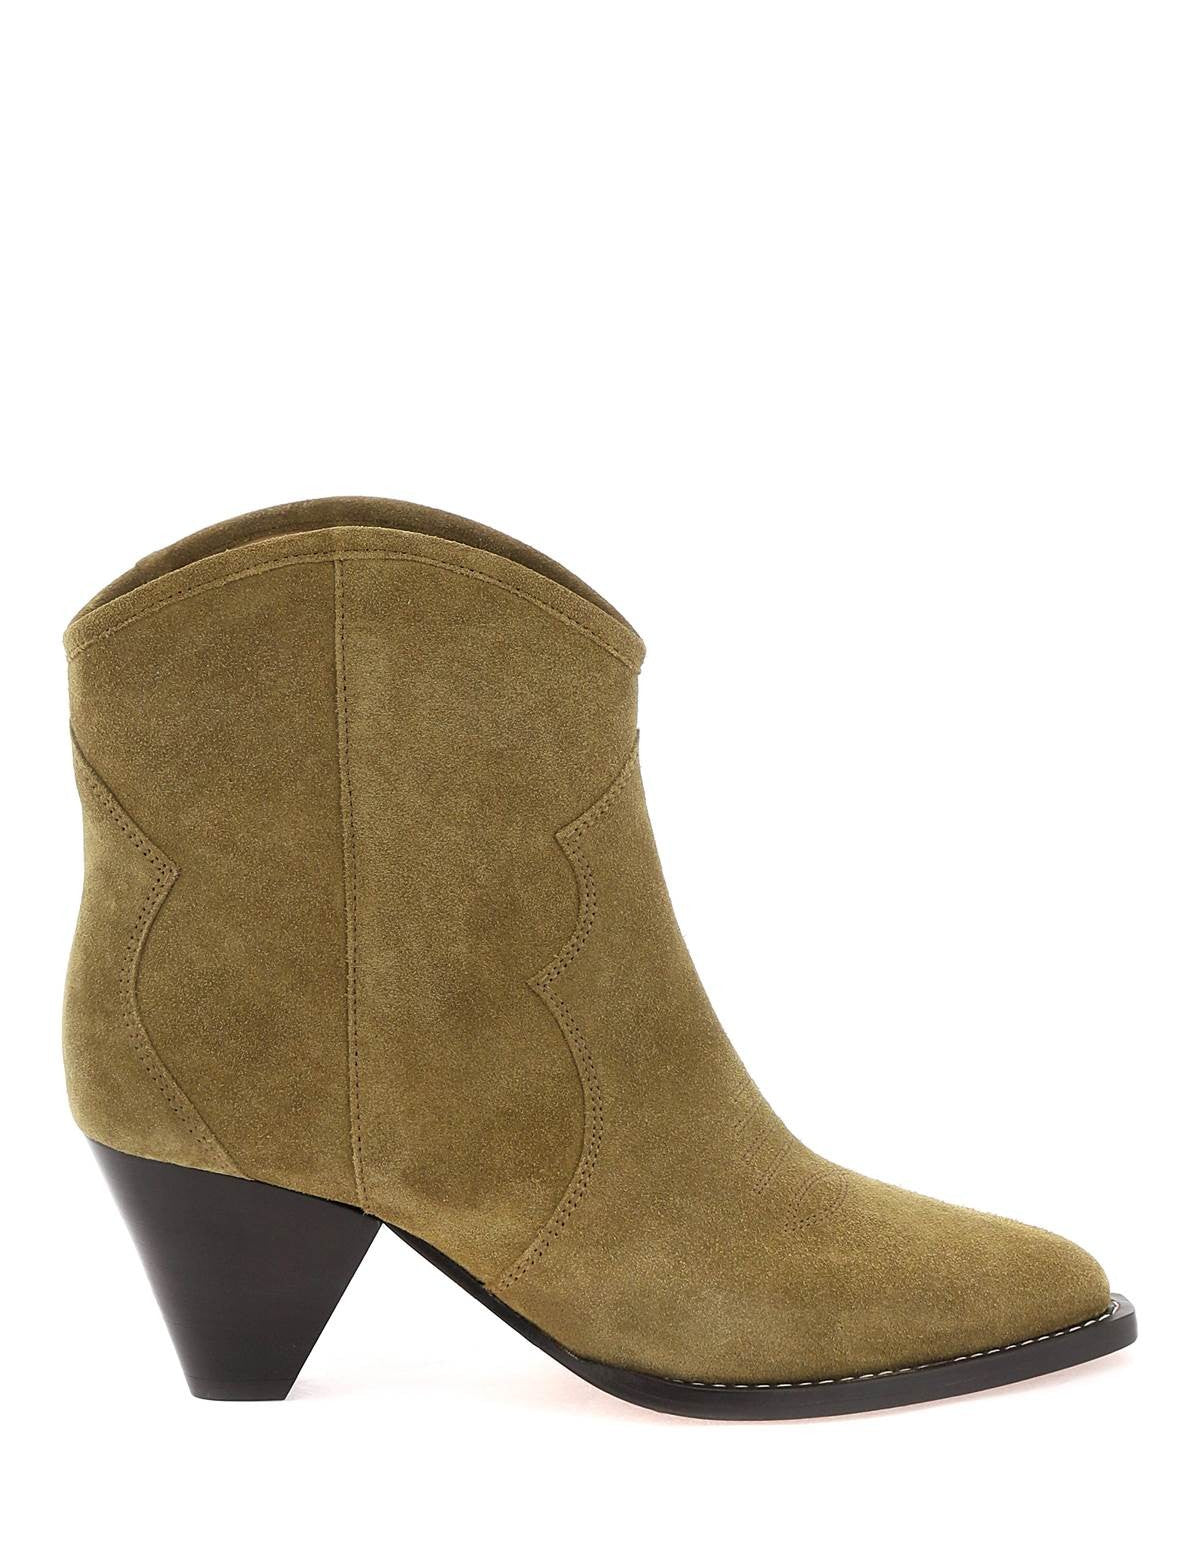 isabel-marant-darizo-suede-ankle-boots.jpg